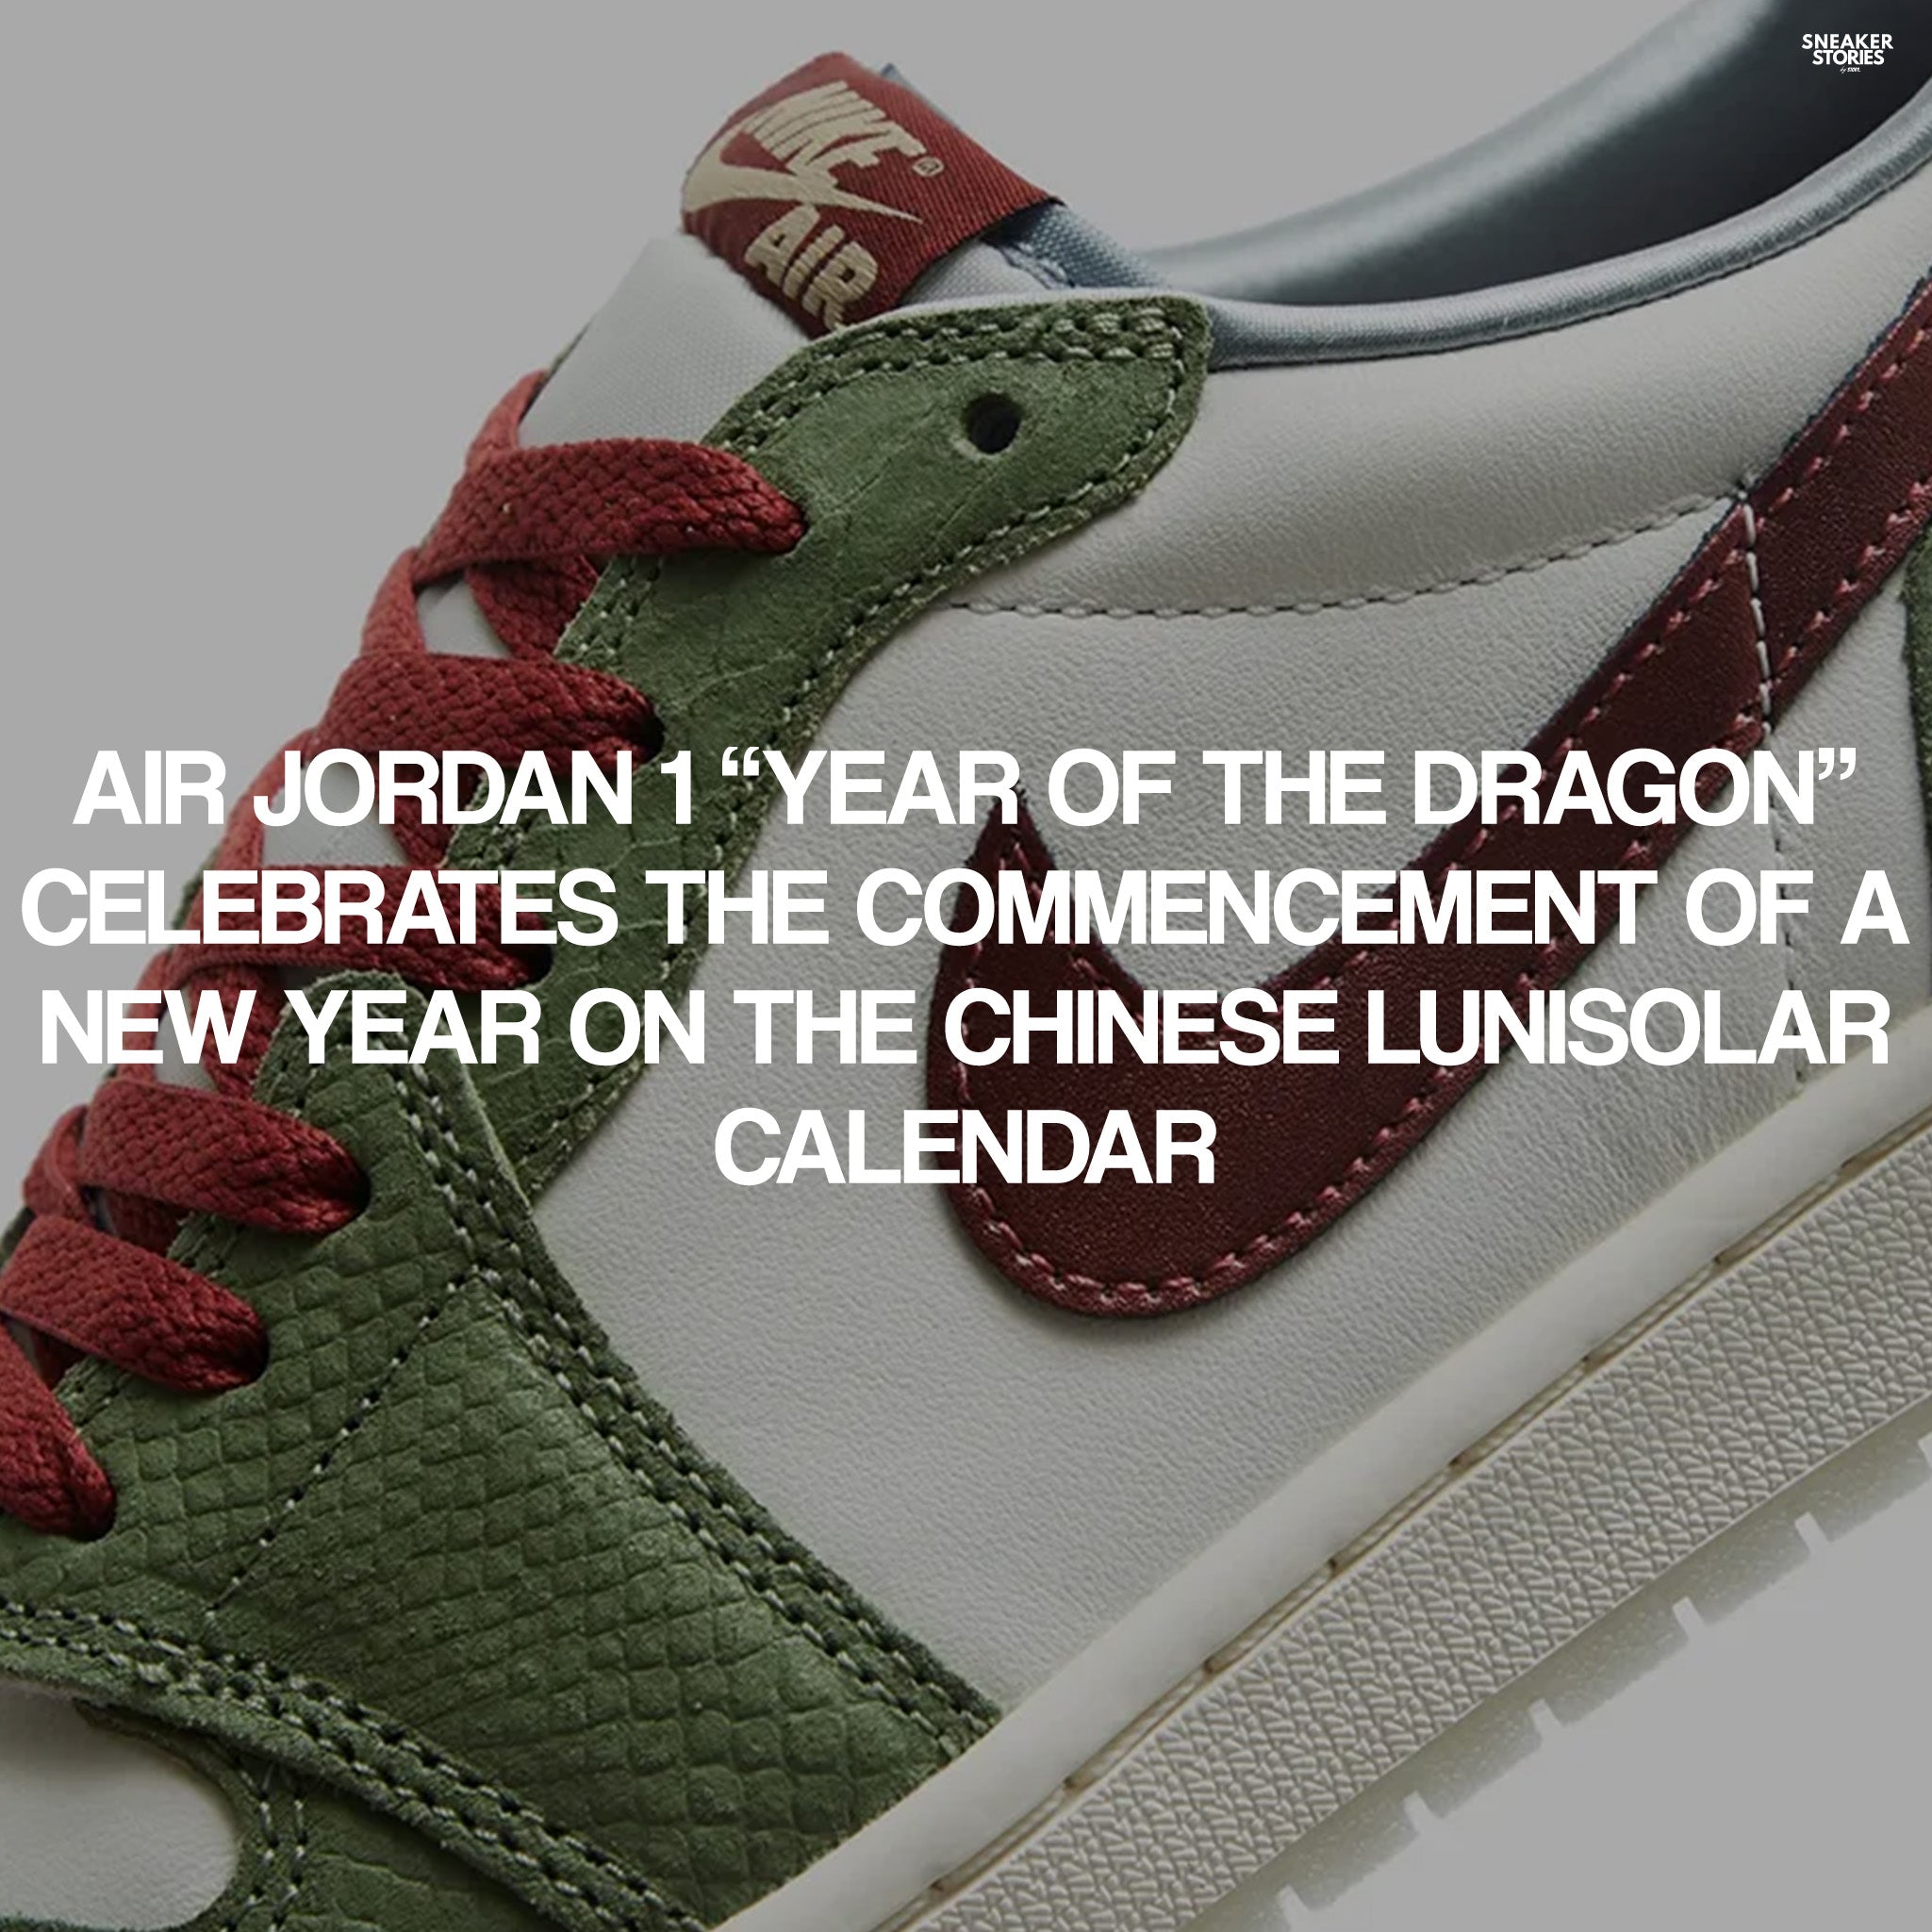 It lives in a palace under the sea Air Jordan 1 “Year of the Dragon”